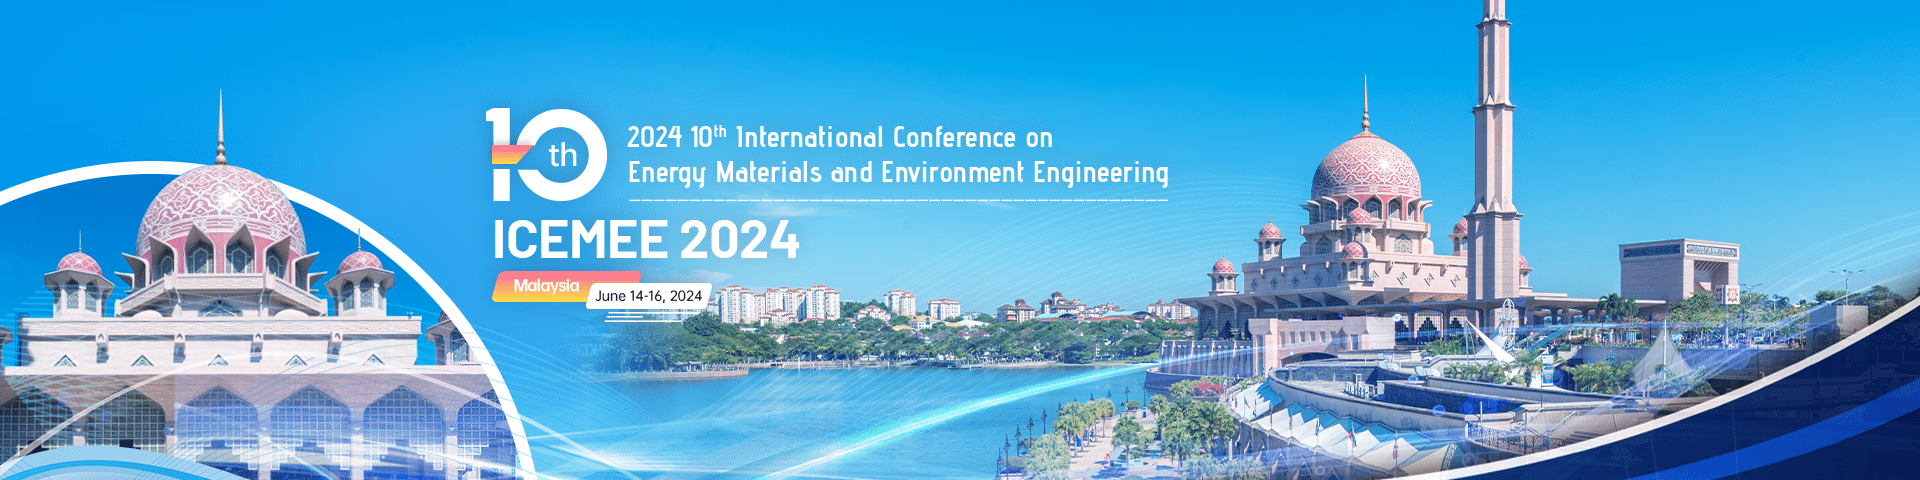 2024 10th International Conference on Energy Materials and Environment Engineering(ICEMEE 2024)